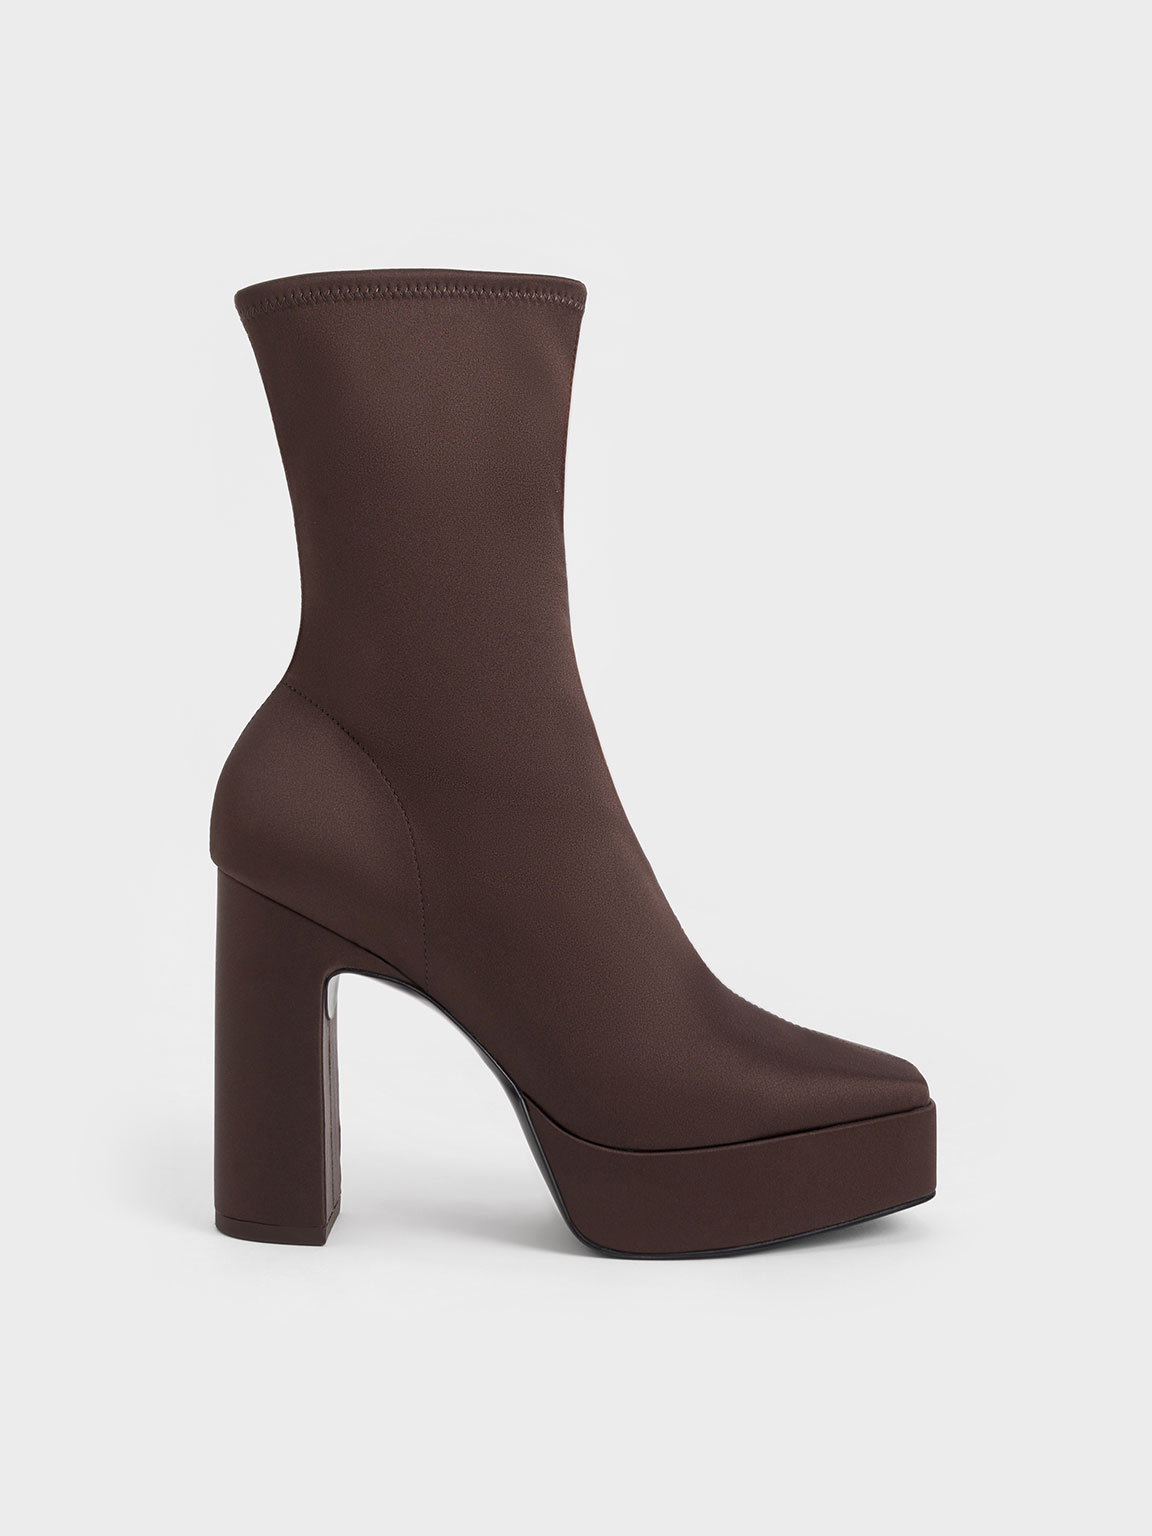 Suede Ankle Boots Chervey Brown // ba&sh UK